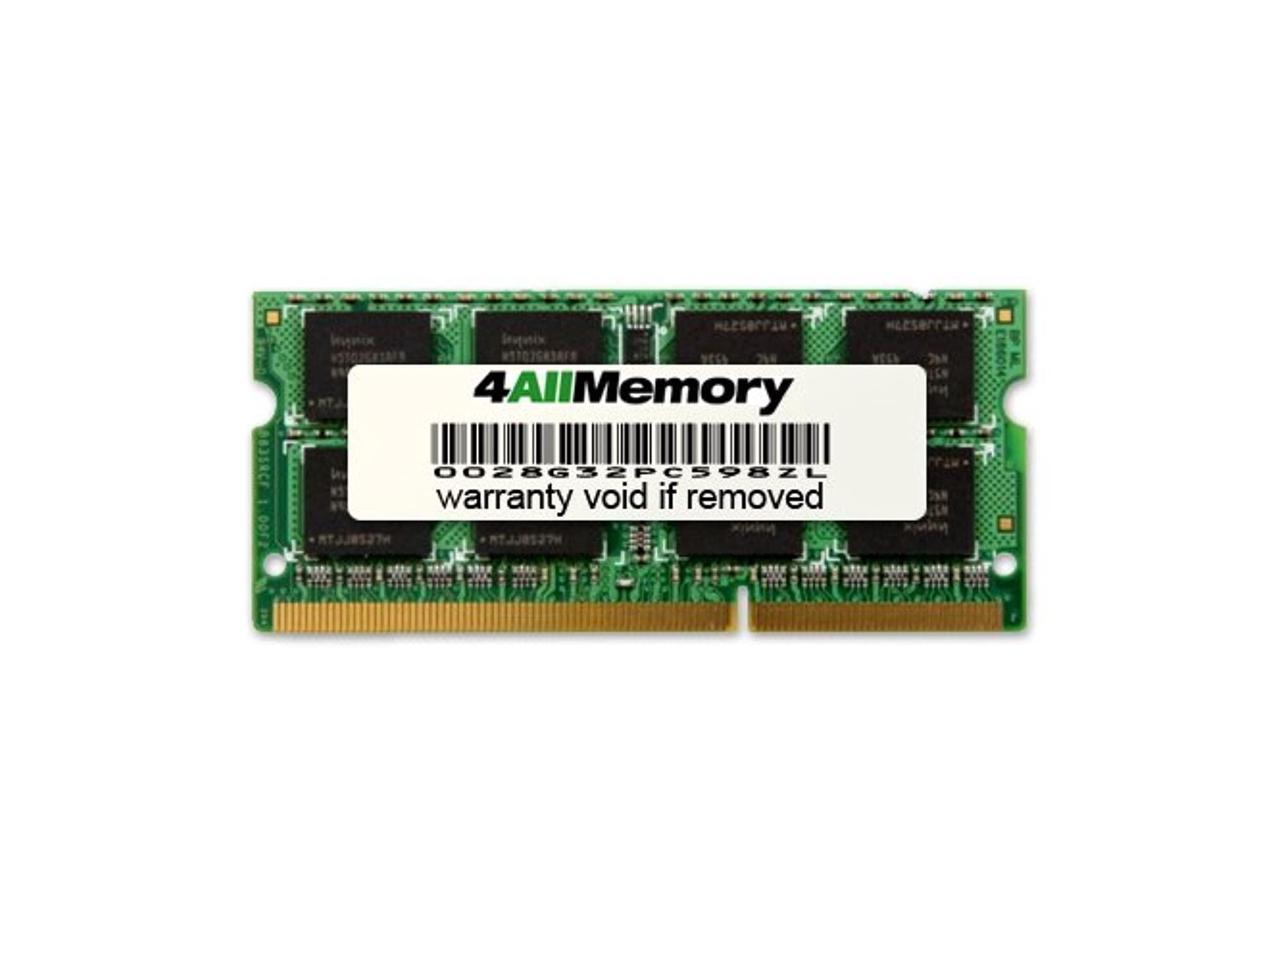 N411z Arch Memory 2 GB 204-Pin DDR3 So-dimm RAM for Dell Inspiron 14z 